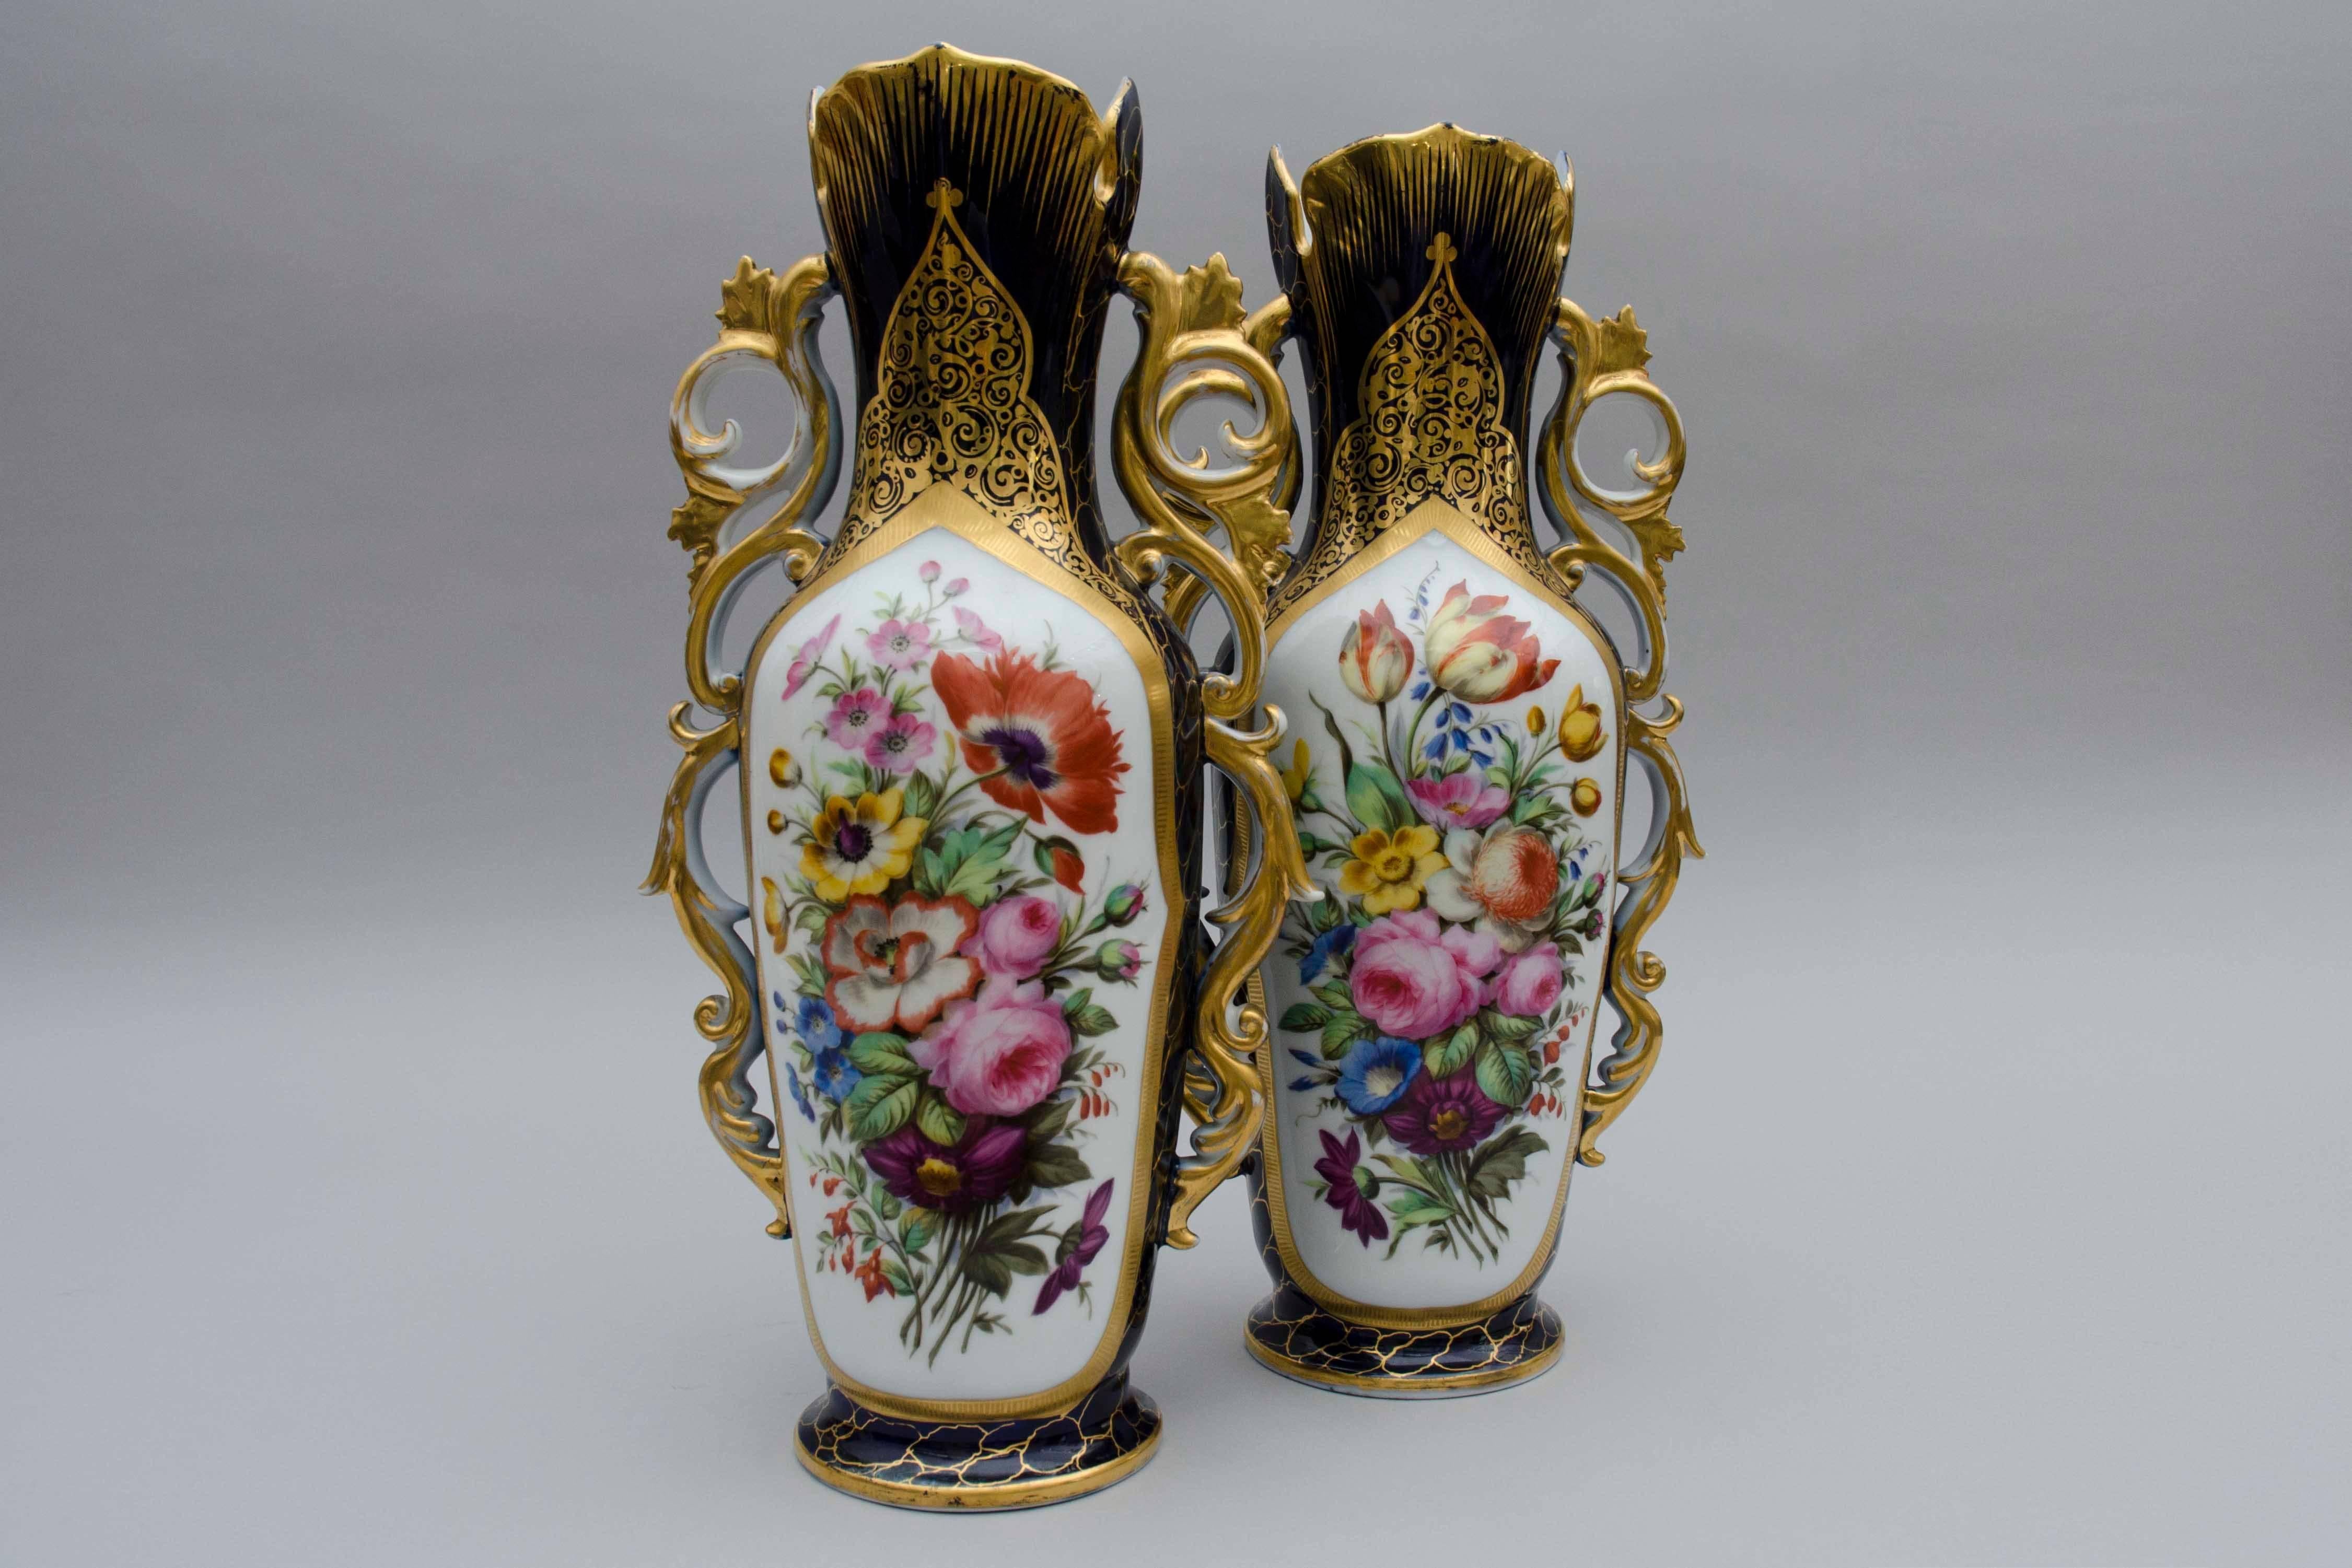 Rare pair of large vases with deep cobalt bleu ground, colourfull floral decorations with highlights of gold. Very decorative handles. Beautiful Valentine porcelain attributed to the talented Fouque workshop, circa 1860. Great condition, some gilt